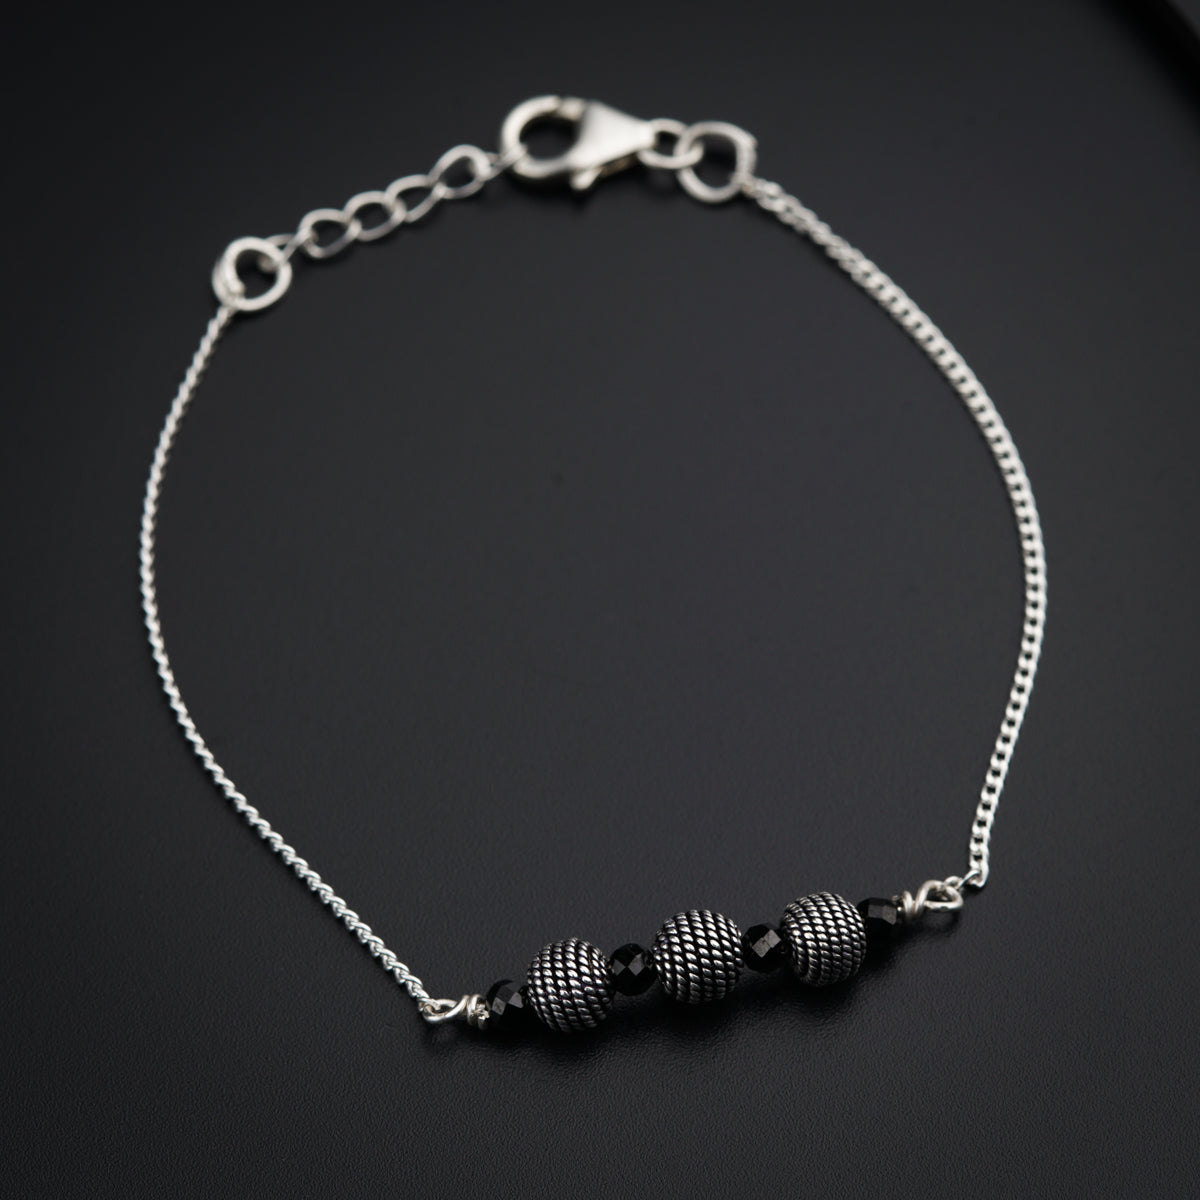 a silver bracelet with black beads on a black surface